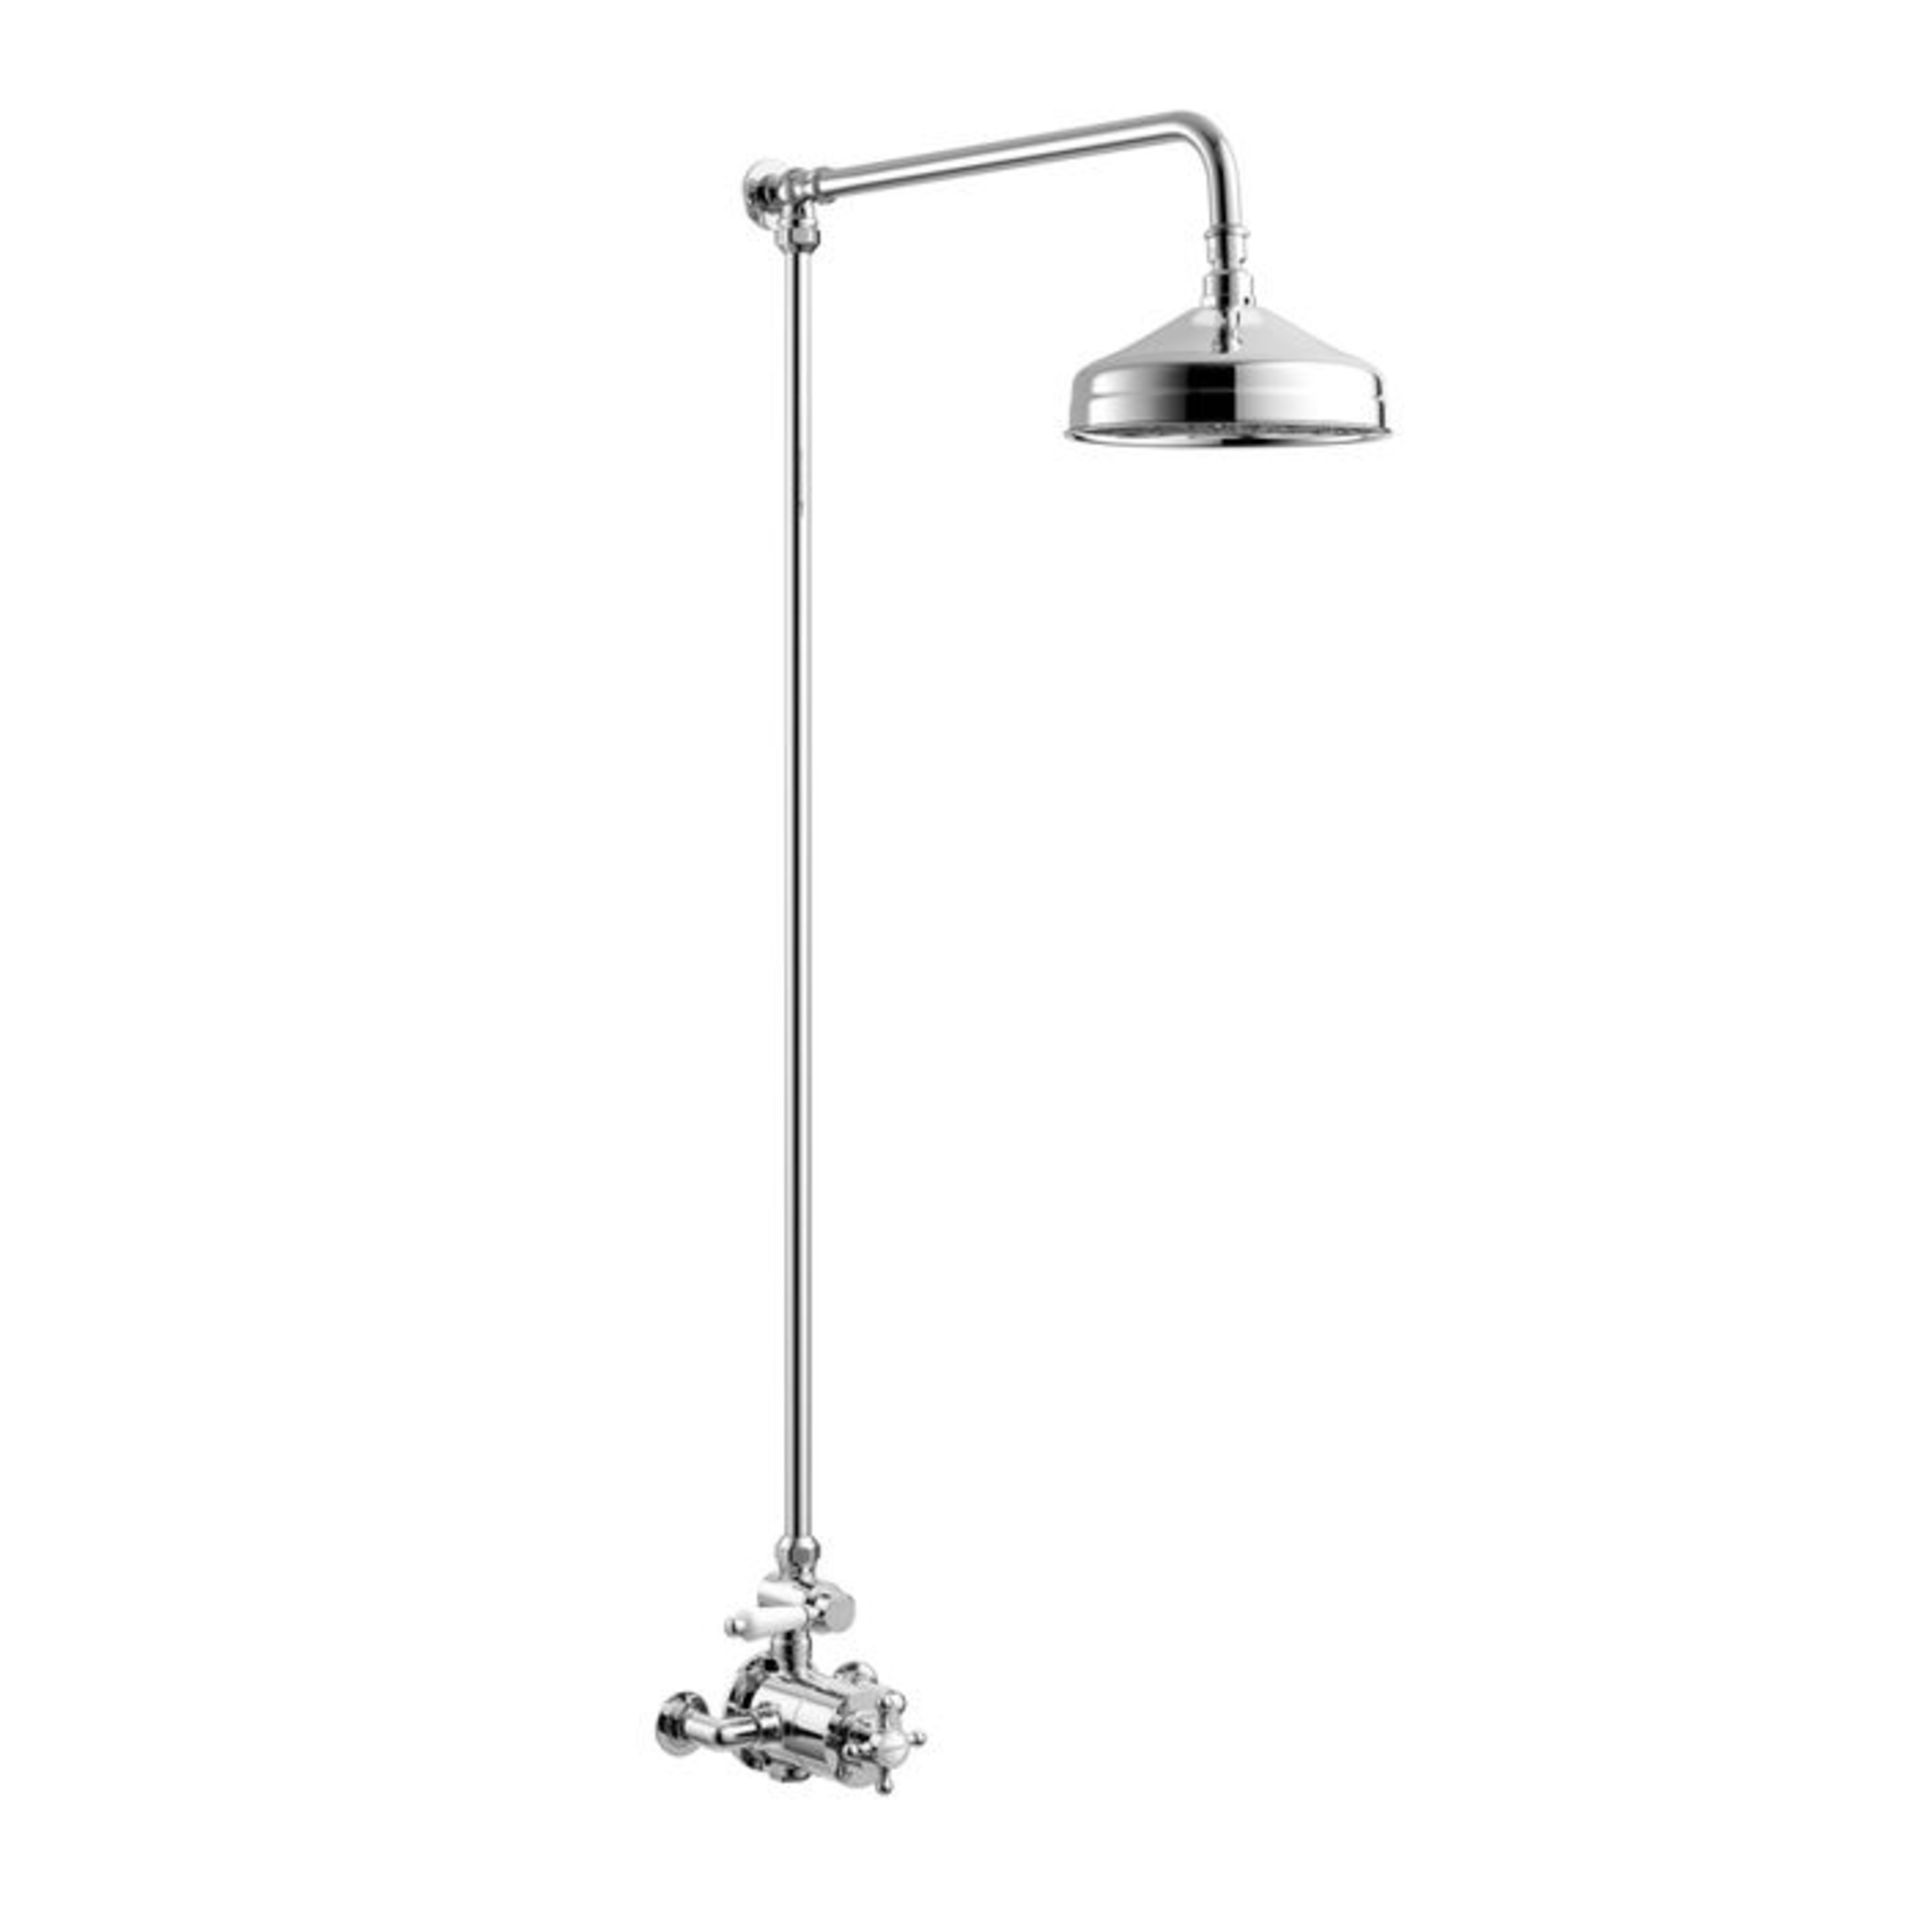 (PP68) Traditional Exposed Thermostatic Shower Kit & Medium Head. Traditional exposed valve co... - Image 2 of 3